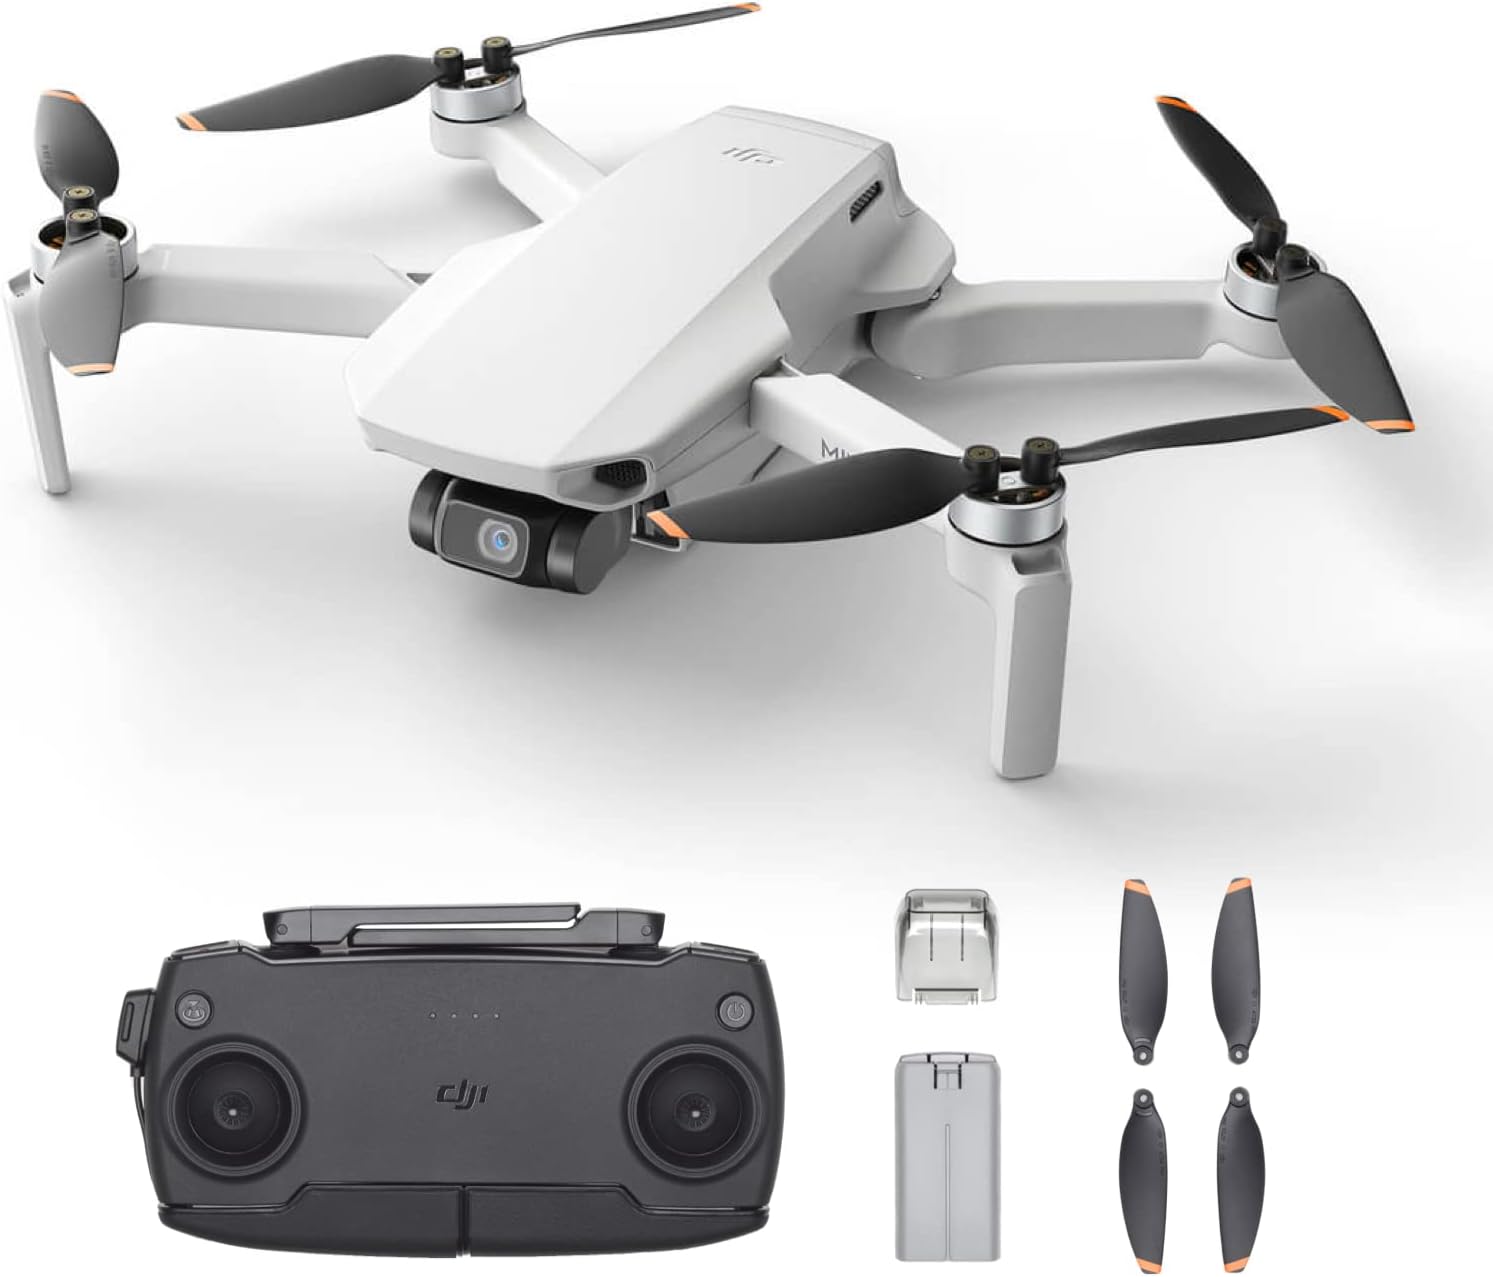 Tech Guide's 2021 12 Days of Christmas Gift Ideas - Day 7: Drones/Gadgets -  Tech Guide